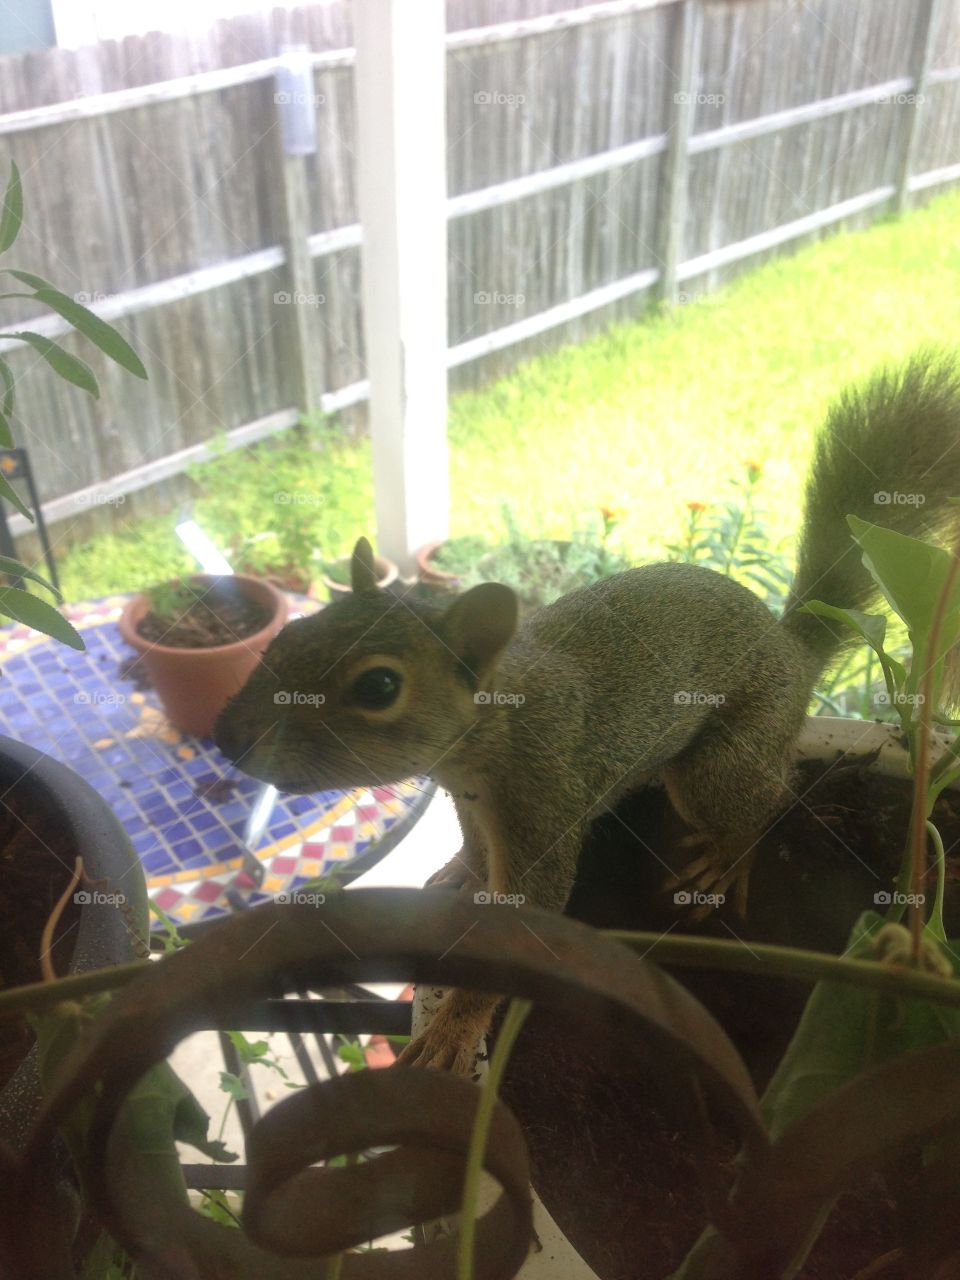 Baby squirrel sitting in a potted plant looking in a window, flowers and plants on porch, tile mosaic patio table